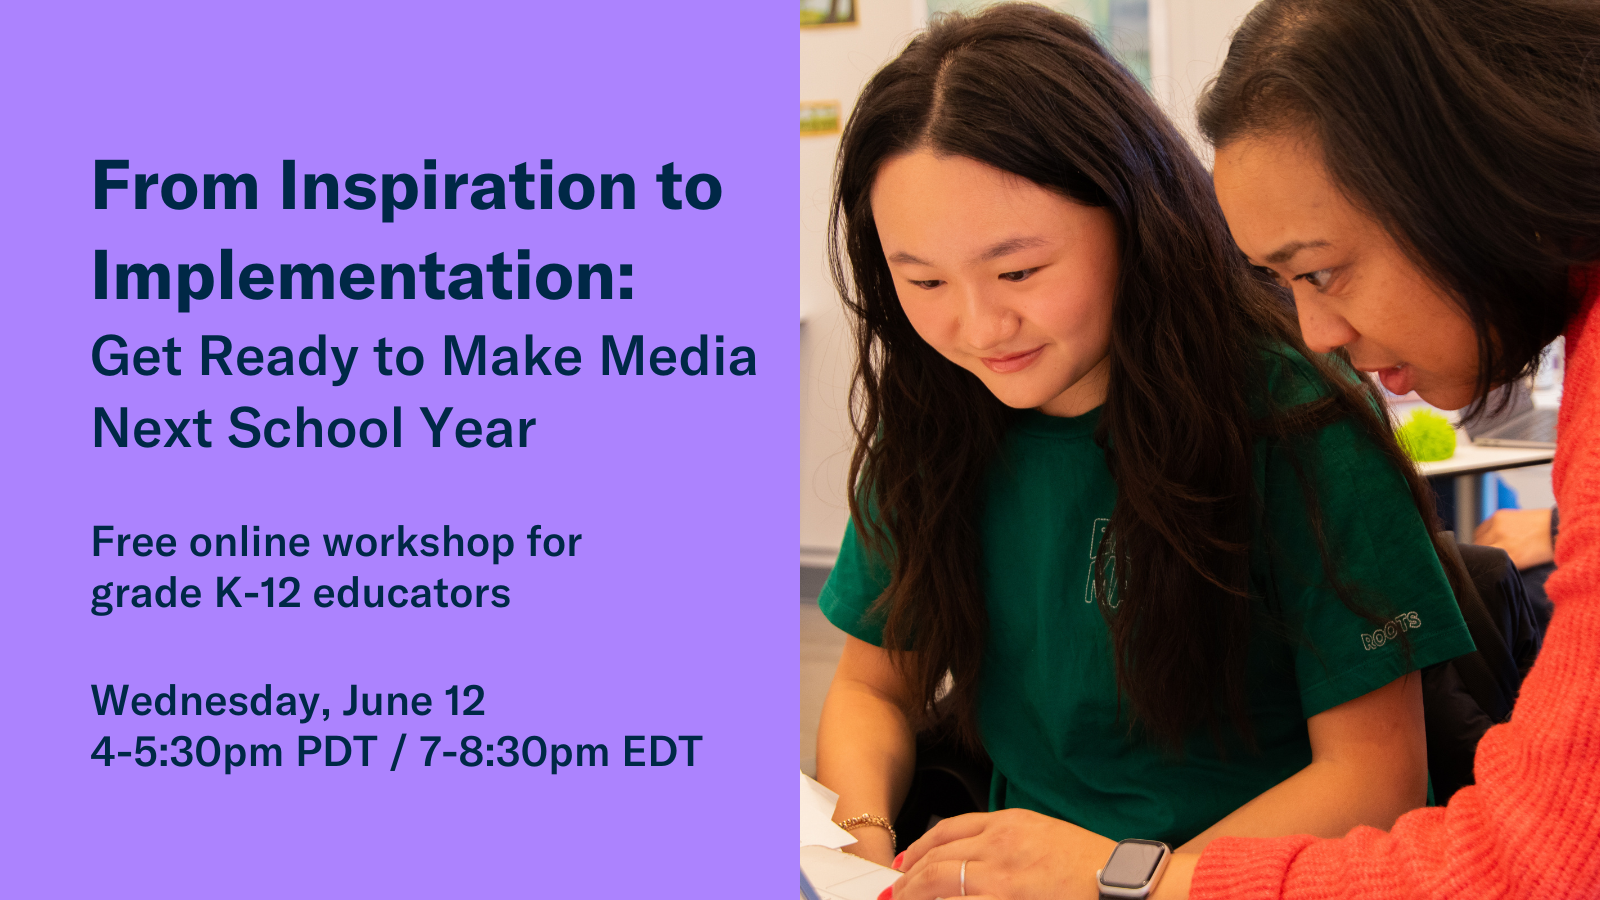 Event title: From Inspiration to Implementation: Get Ready to Make Media Next School Year. Image: A teacher and a student working together